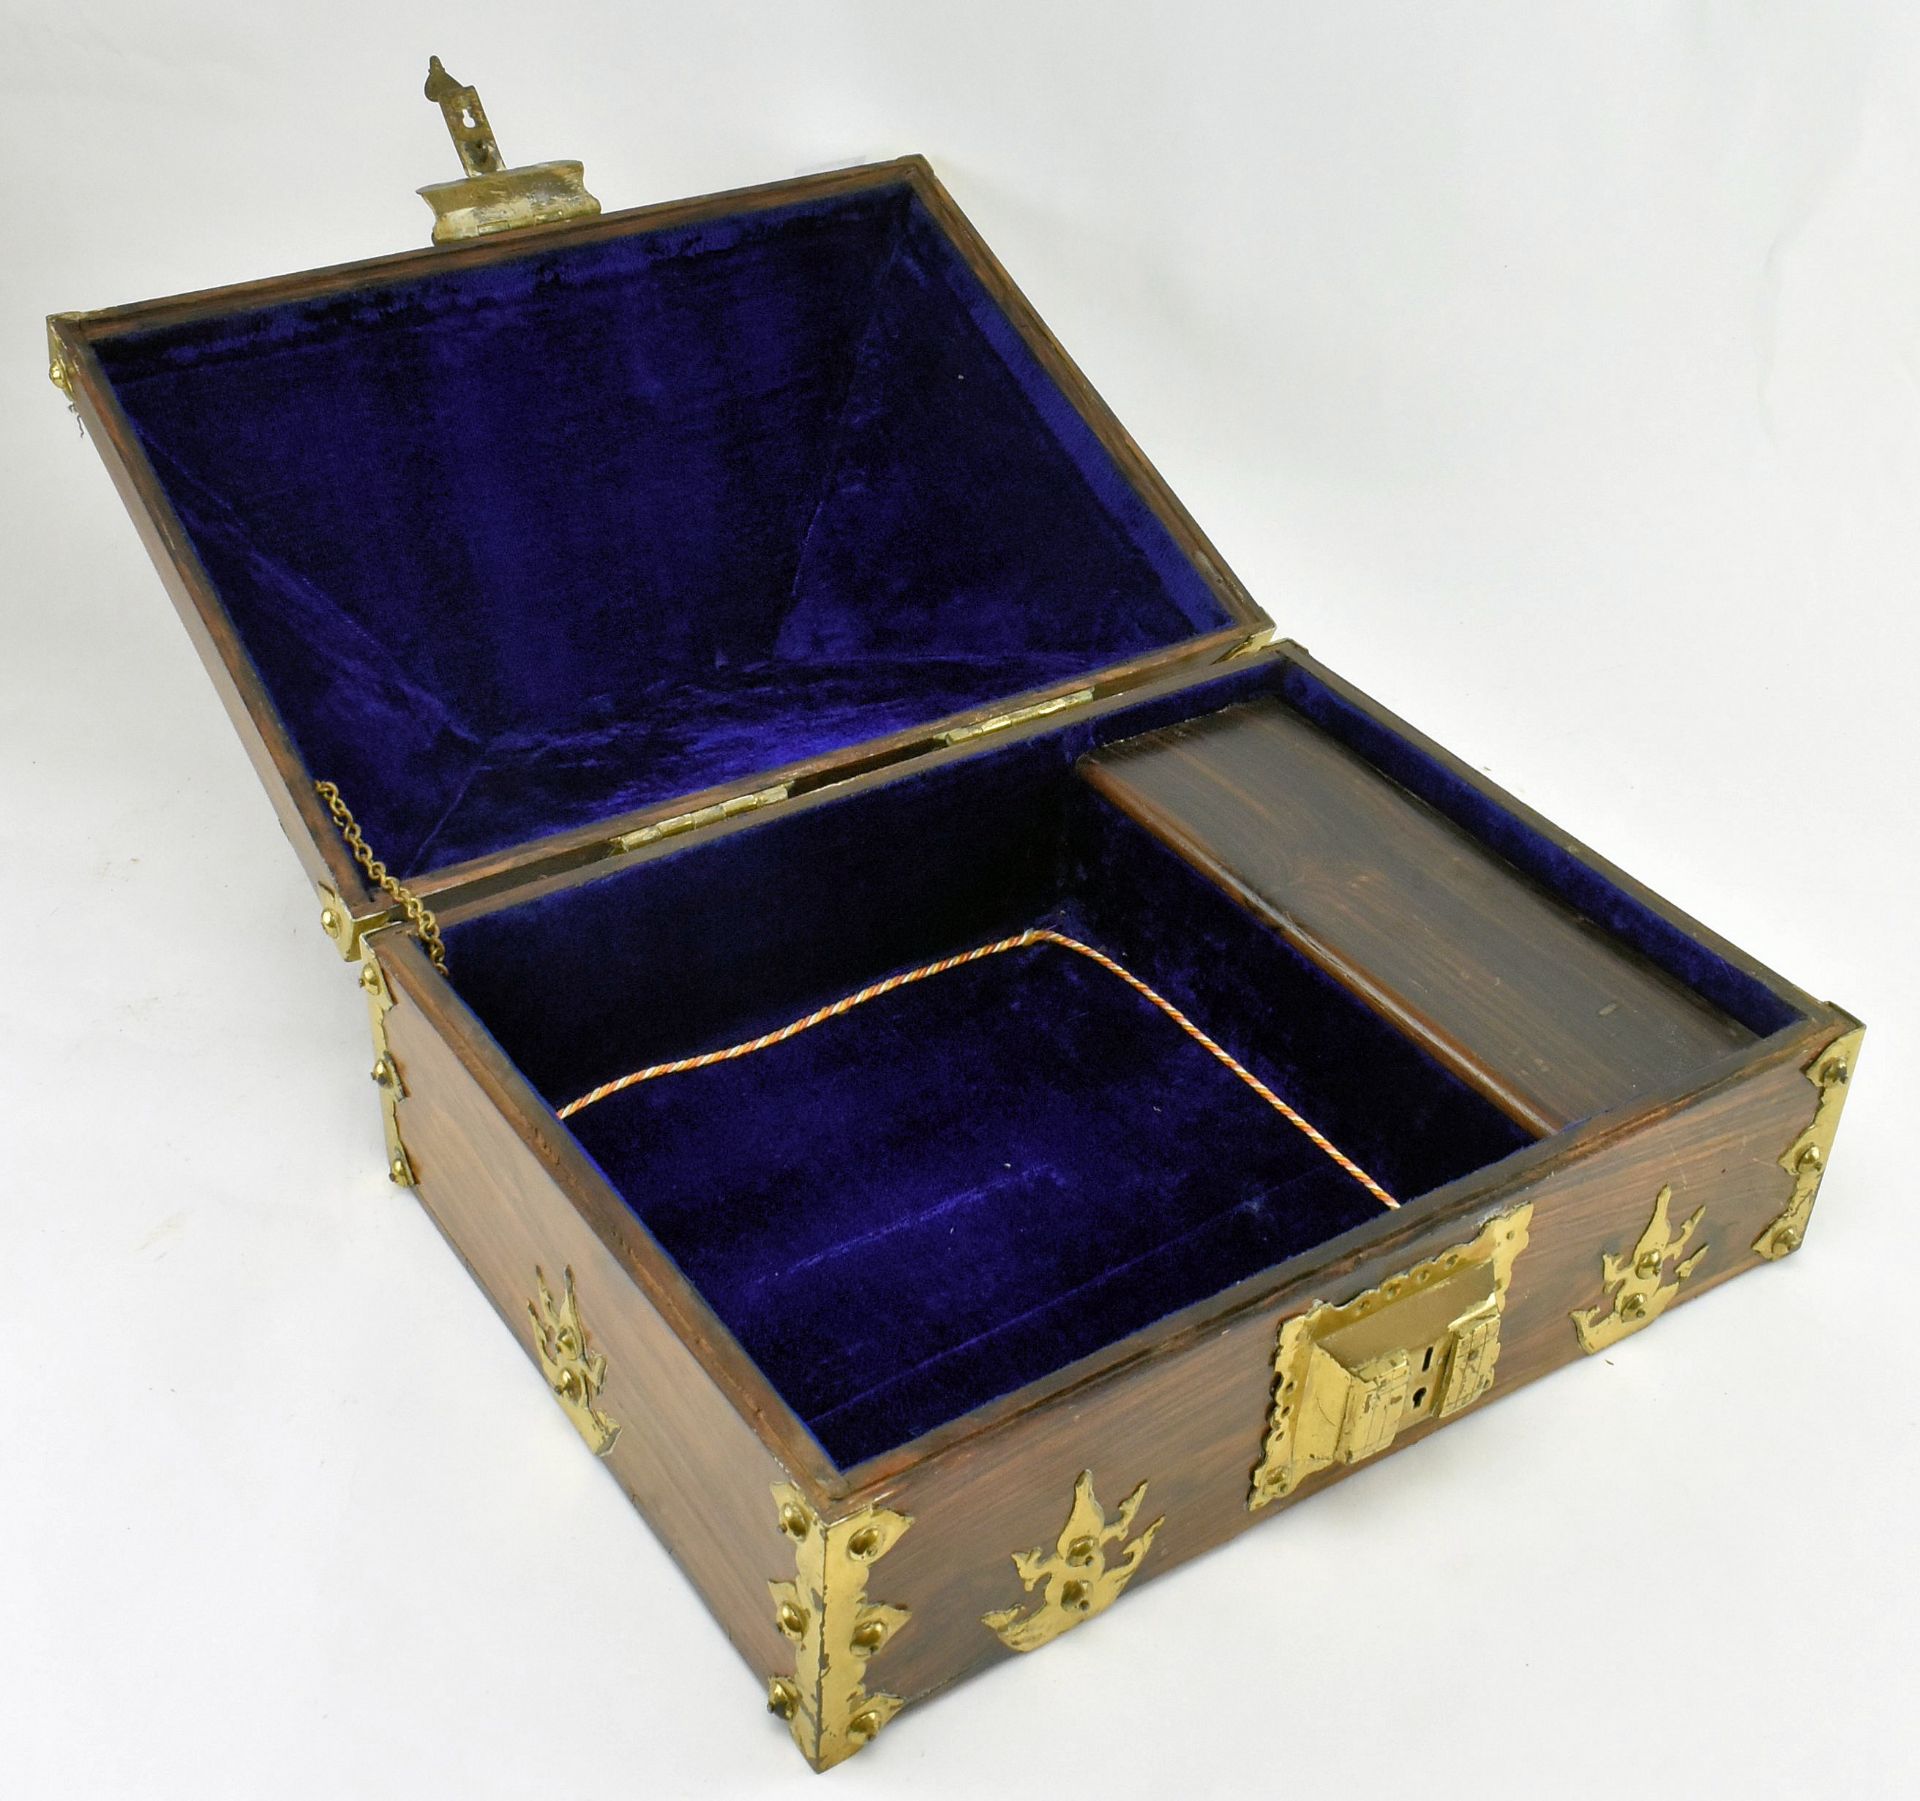 SOUTH INDIAN ROSEWOOD & GILDED METAL DOWRY BOX - Image 4 of 6